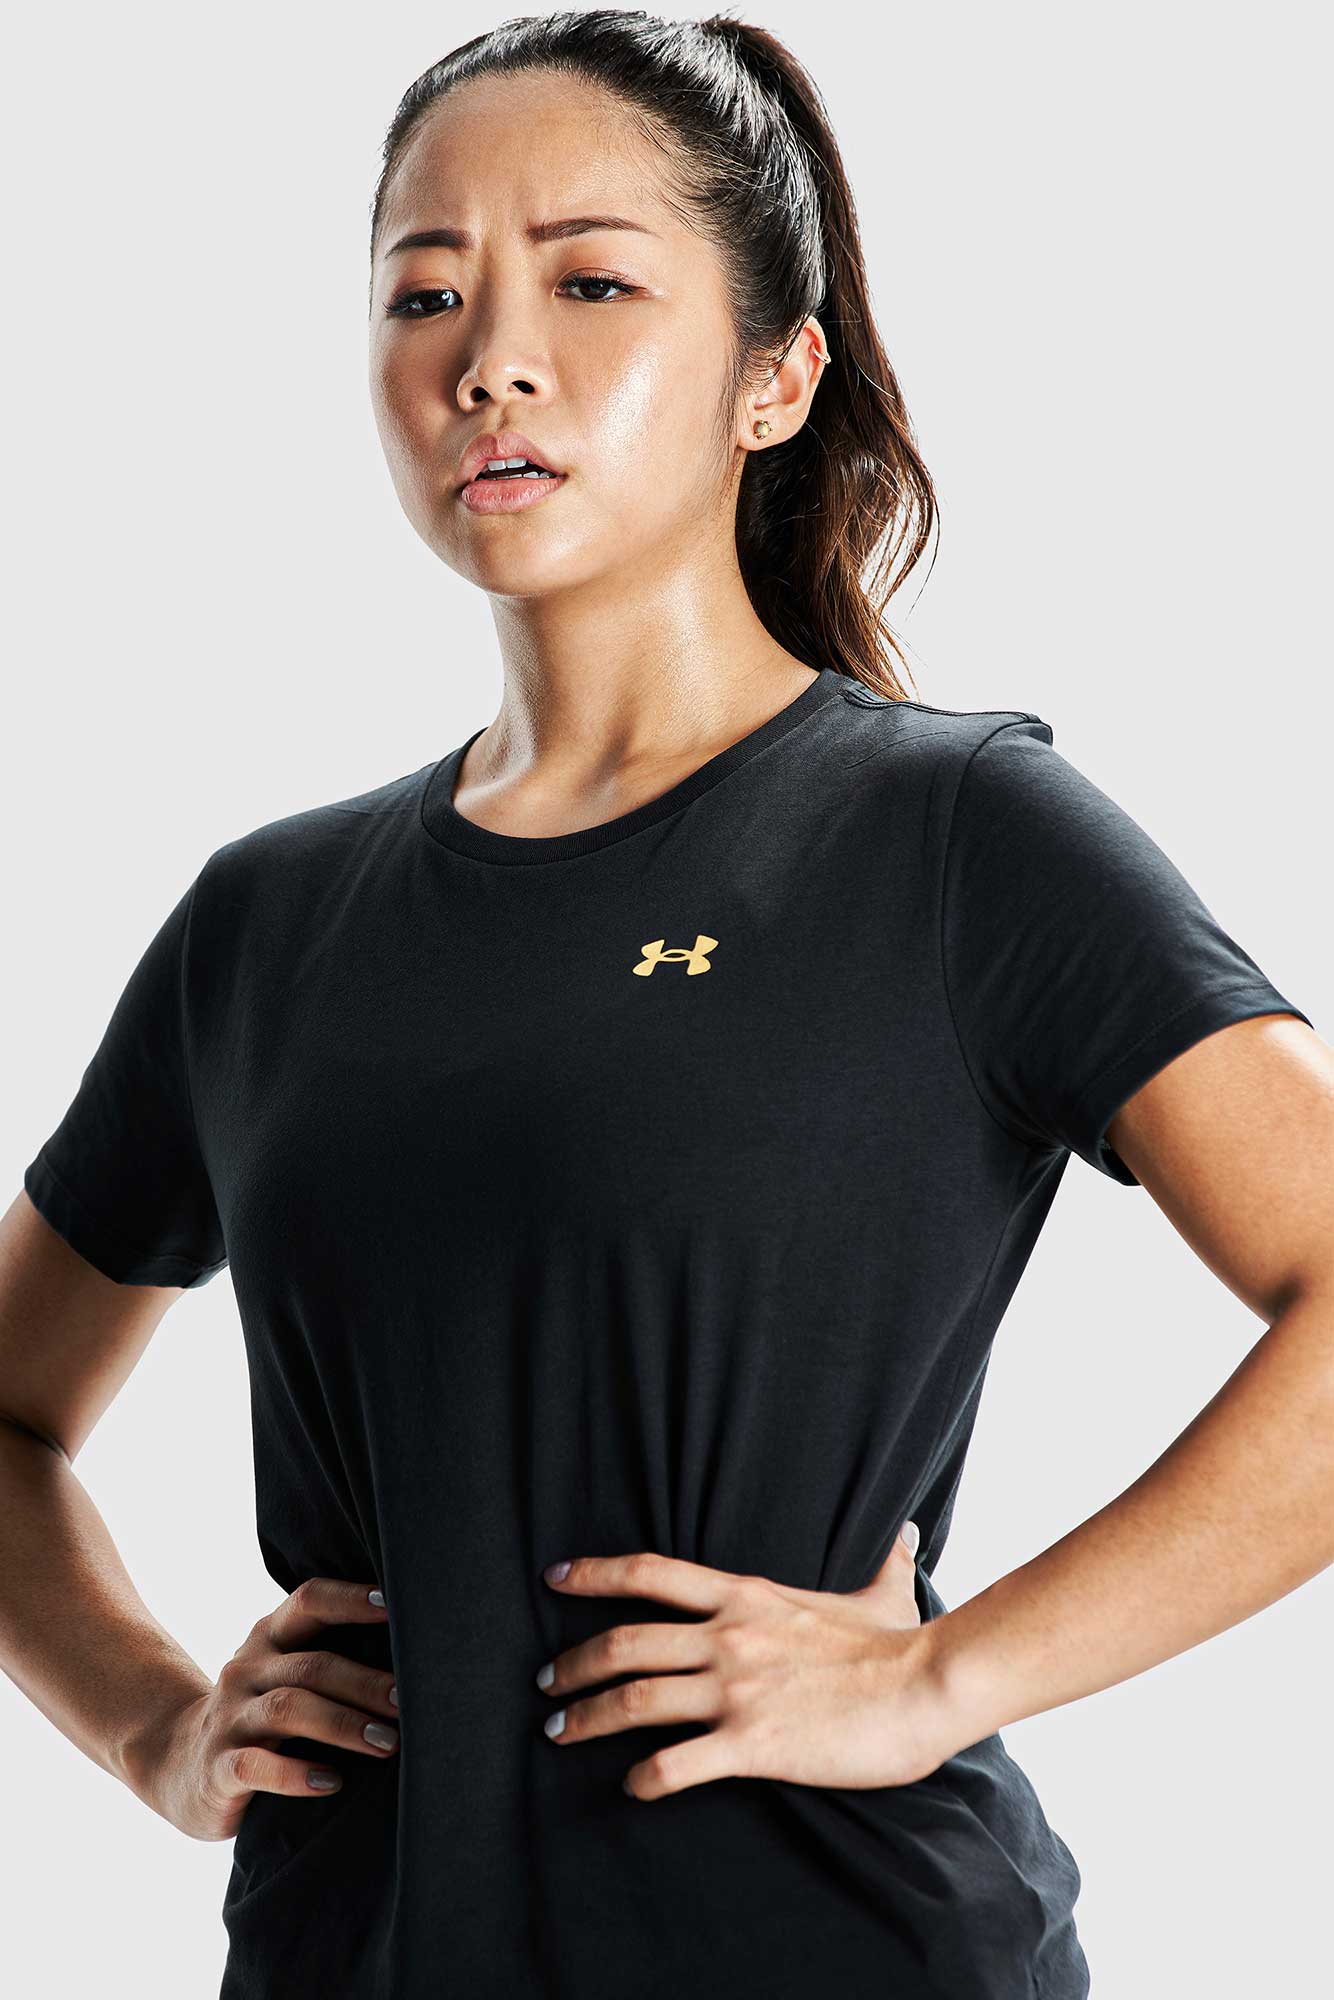 Under-Armour-Models-05